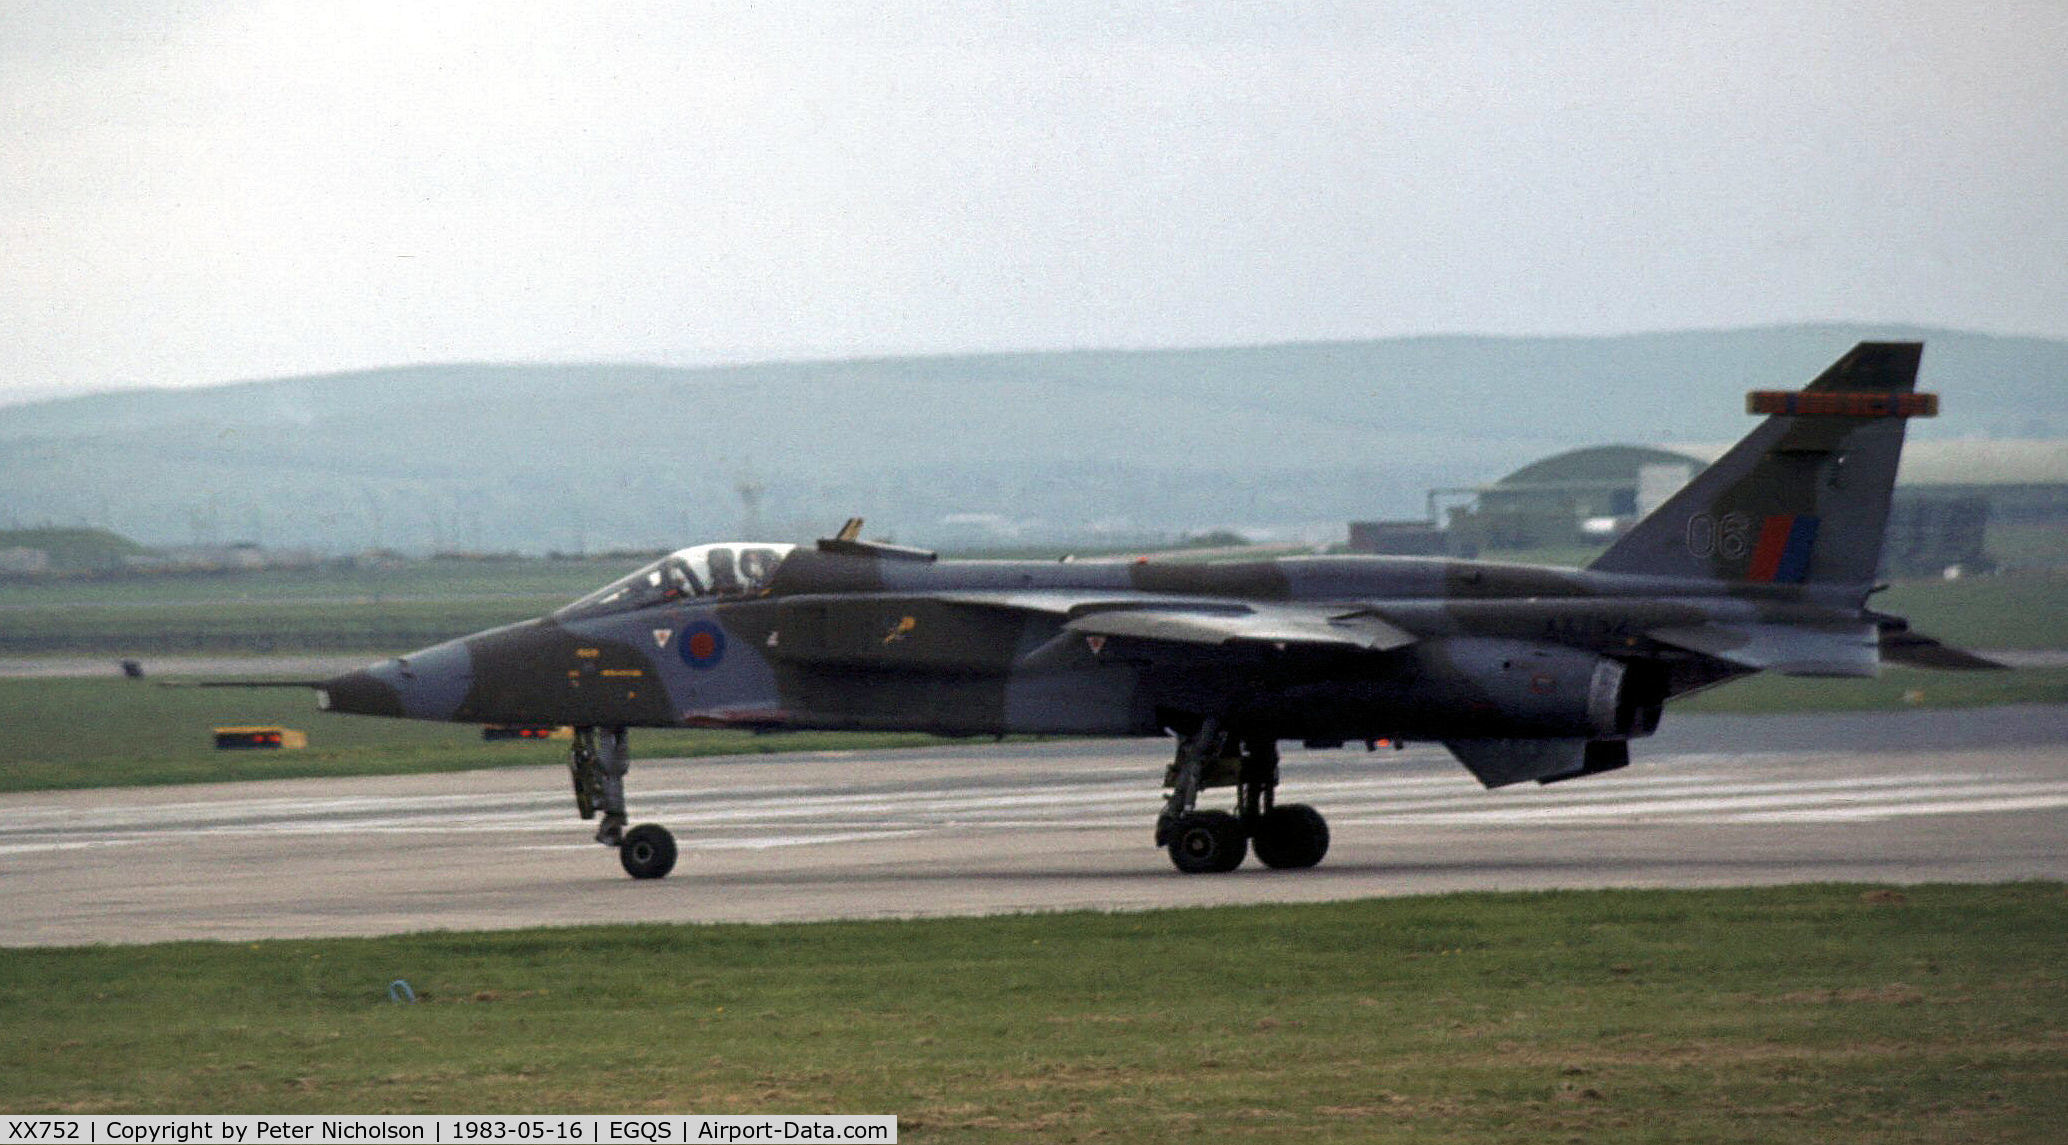 XX752, 1975 Sepecat Jaguar GR.1A C/N S.49, Jaguar GR.1 of 226 Operational Conversion Unit taxying to Runway 05 at RAF Lossiemouth in May 1983.